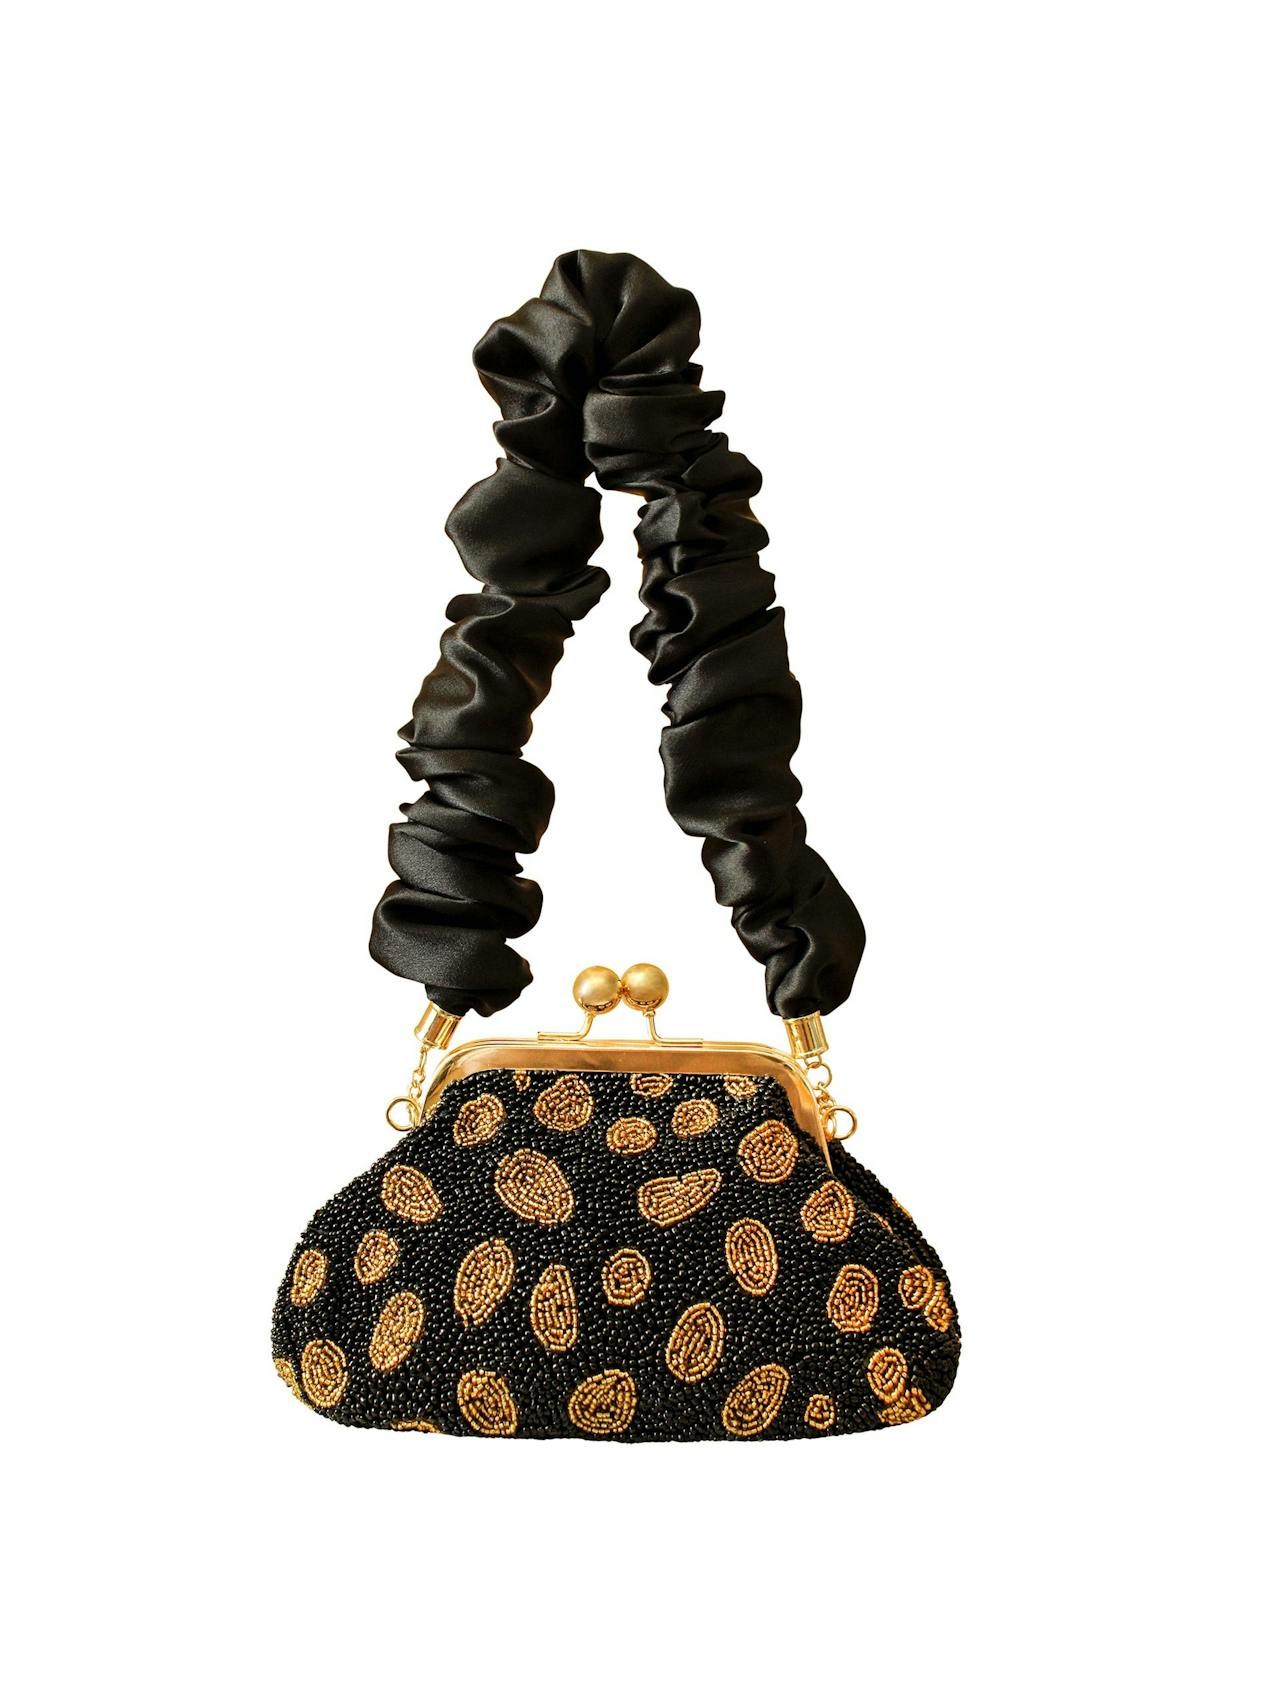 Arnoldi black gold hand-beaded clutch in black and gold